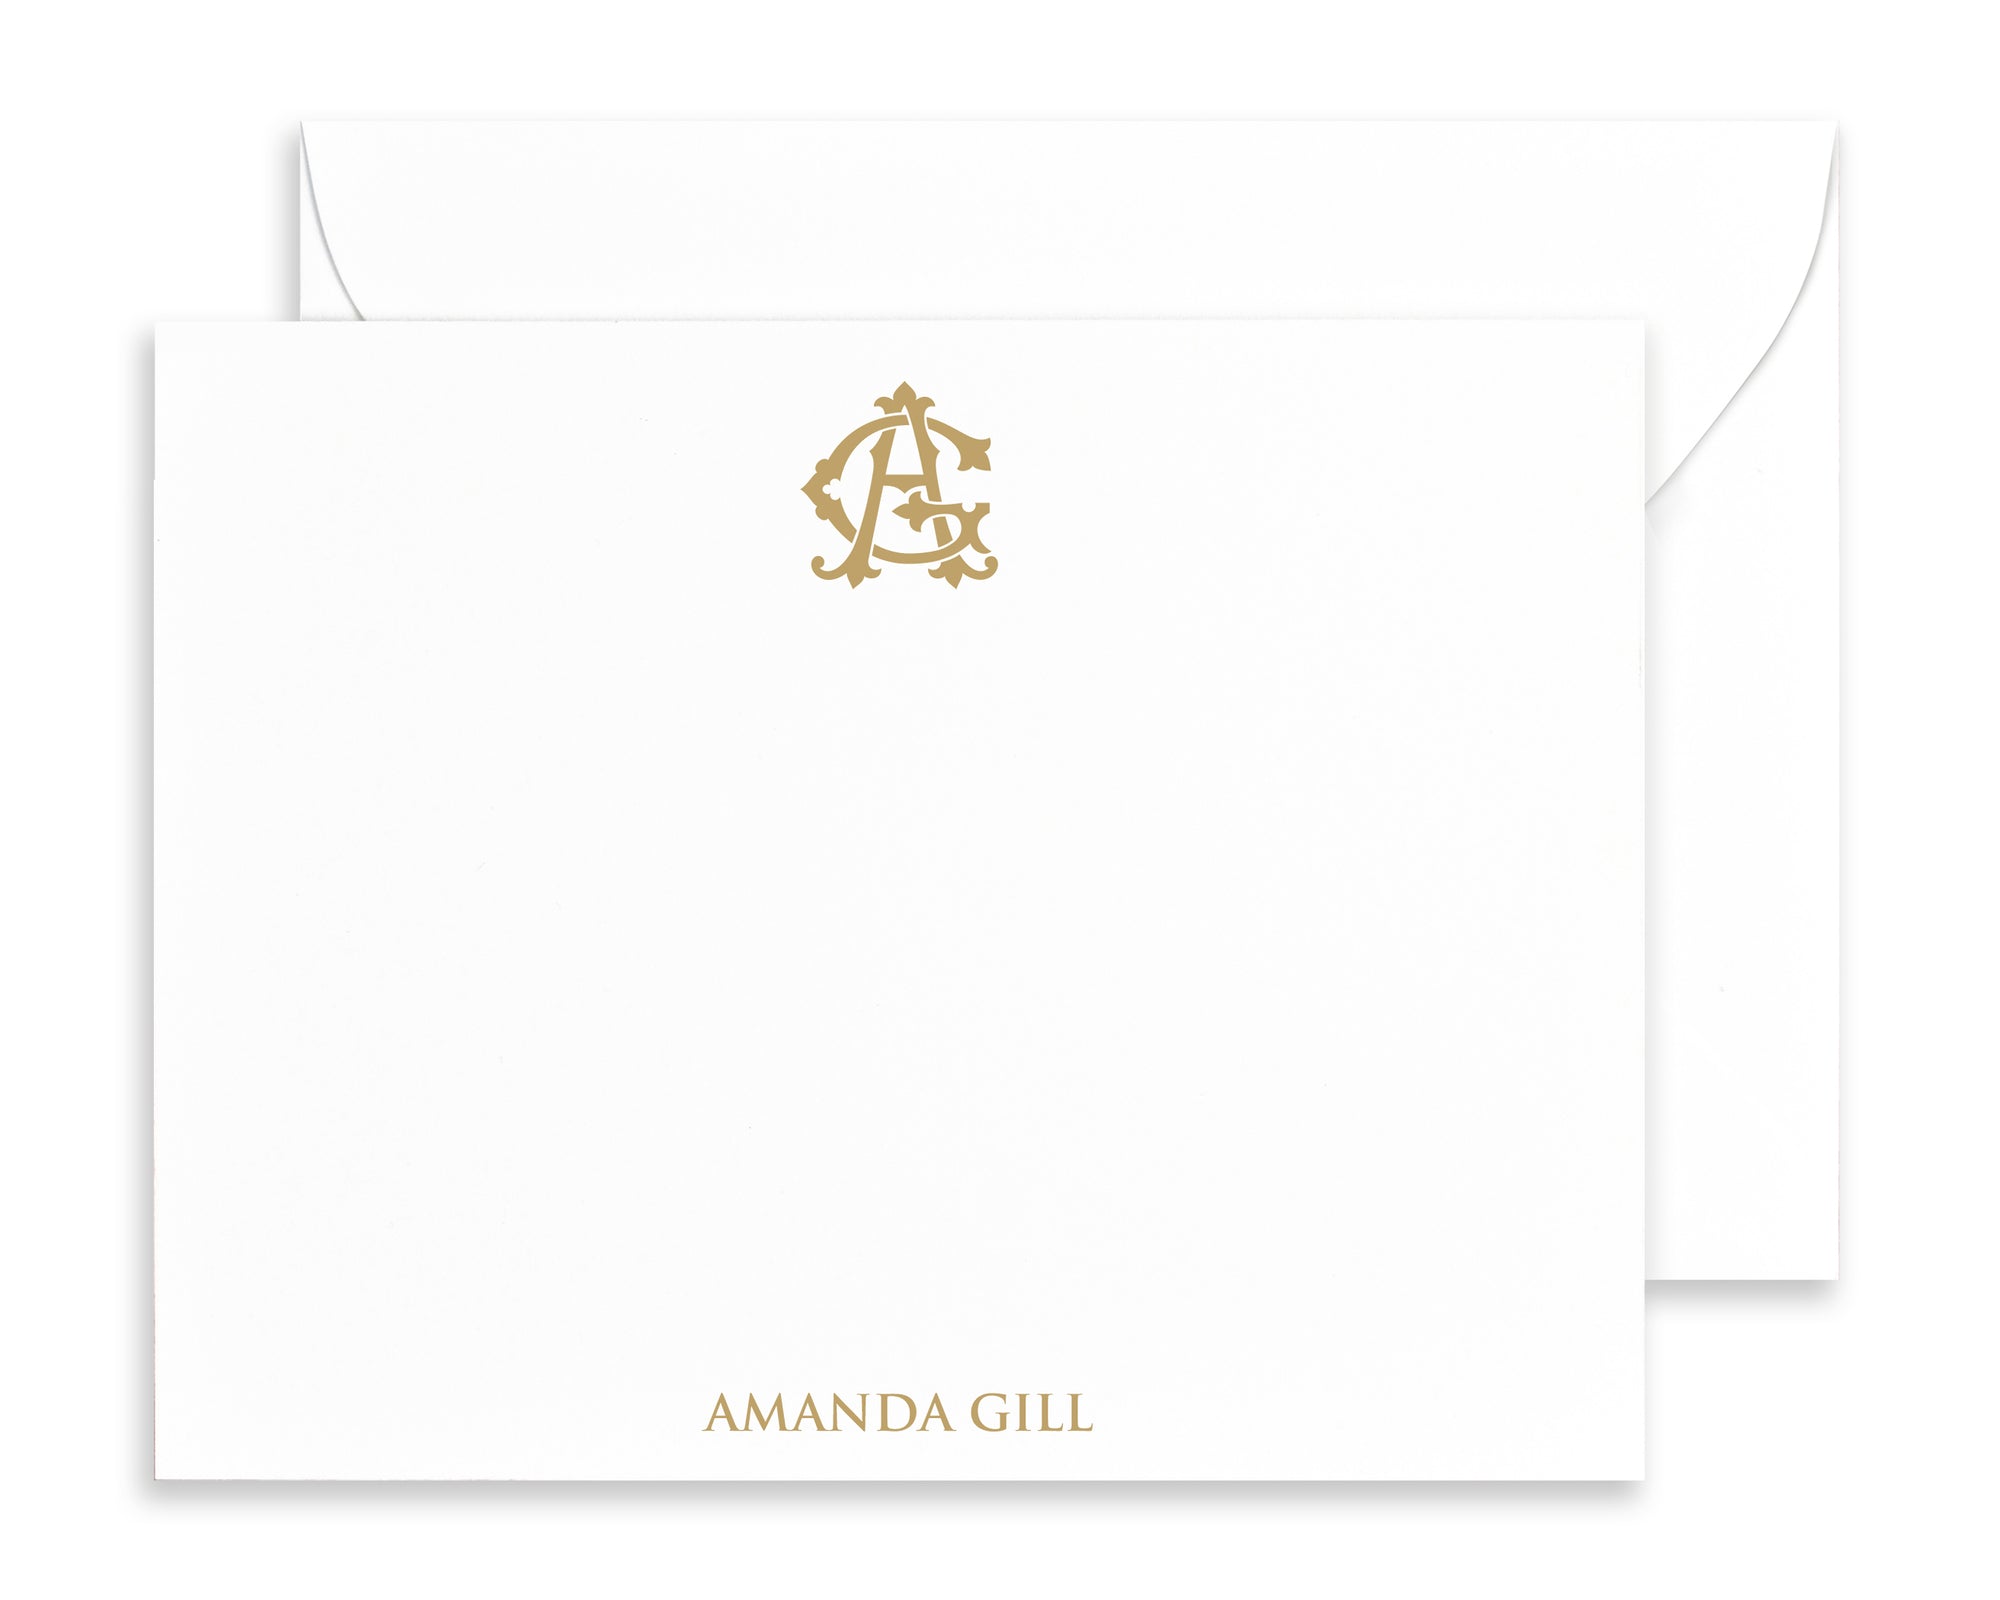 Personalized Monogram Stationery, Initial Note Card Sets